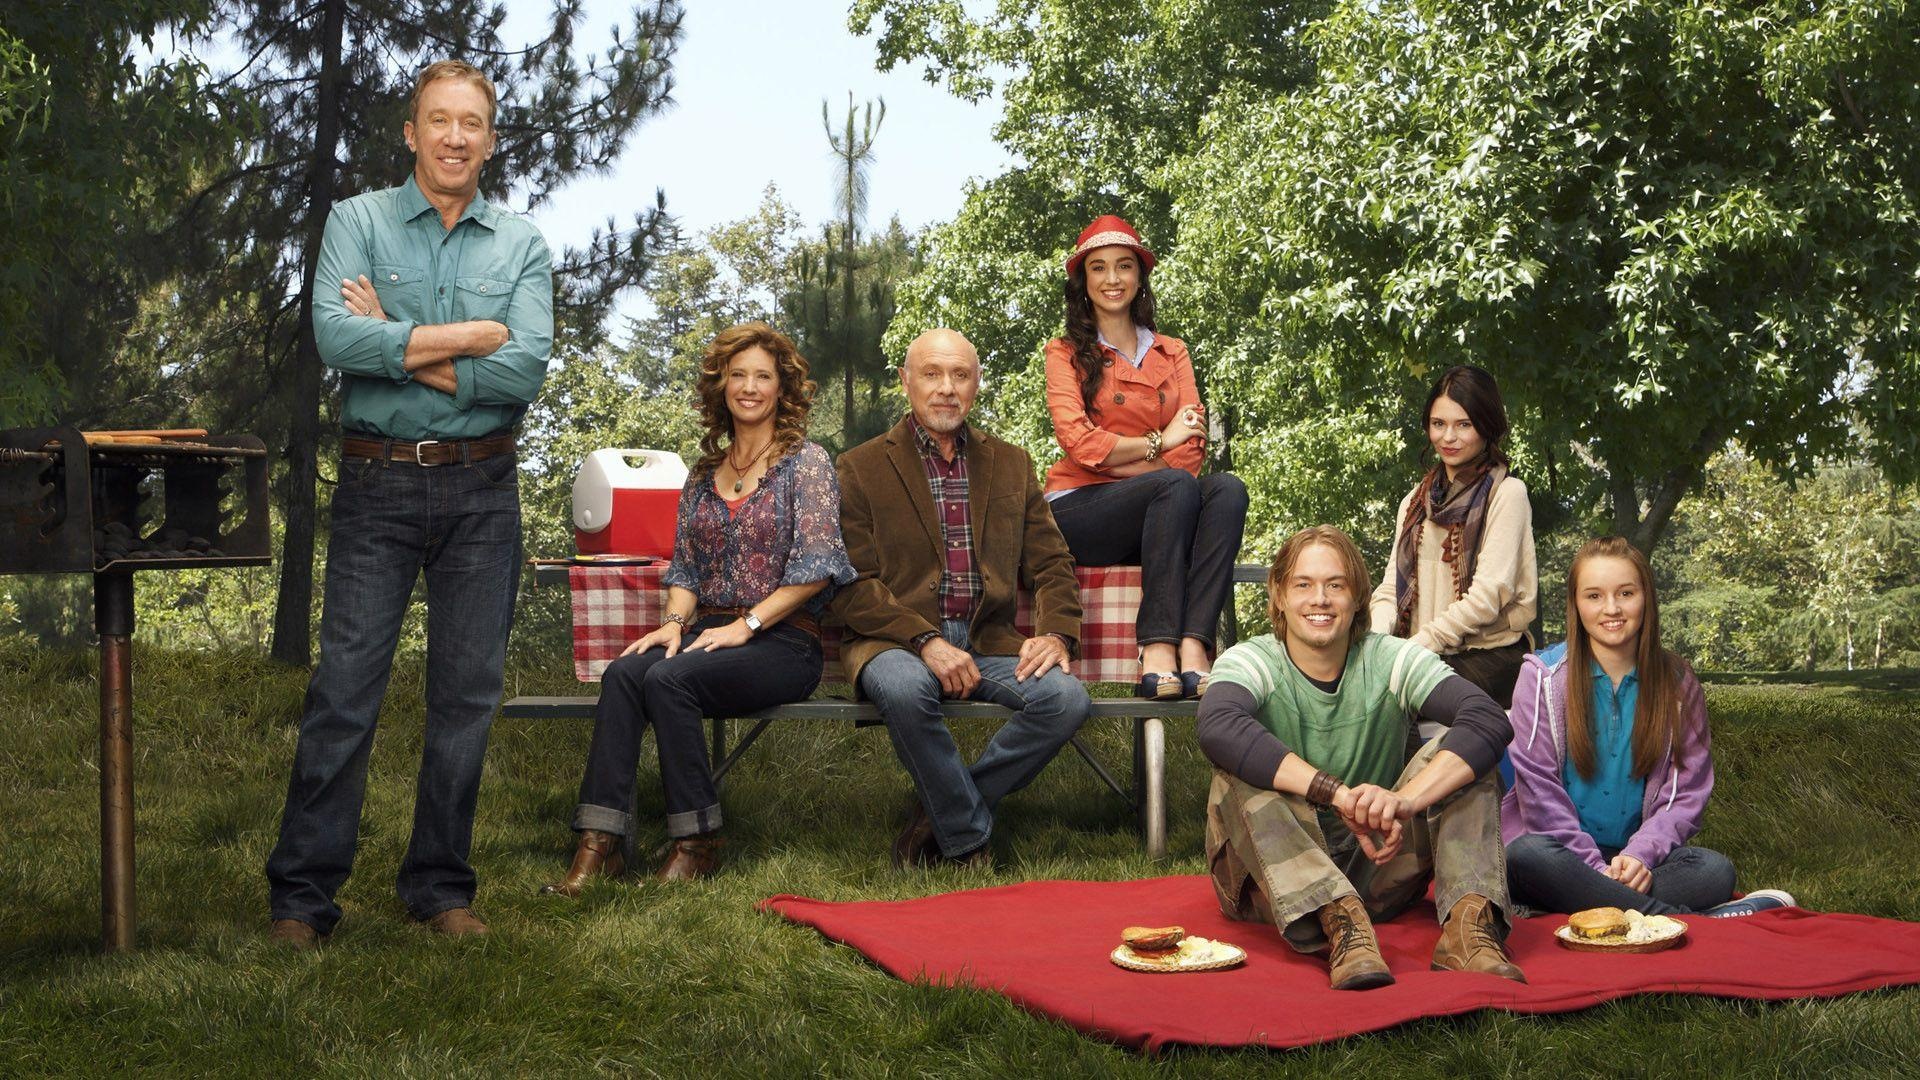 Last Man Standing wallpapers, collection, High-quality images, TV series, 1920x1080 Full HD Desktop